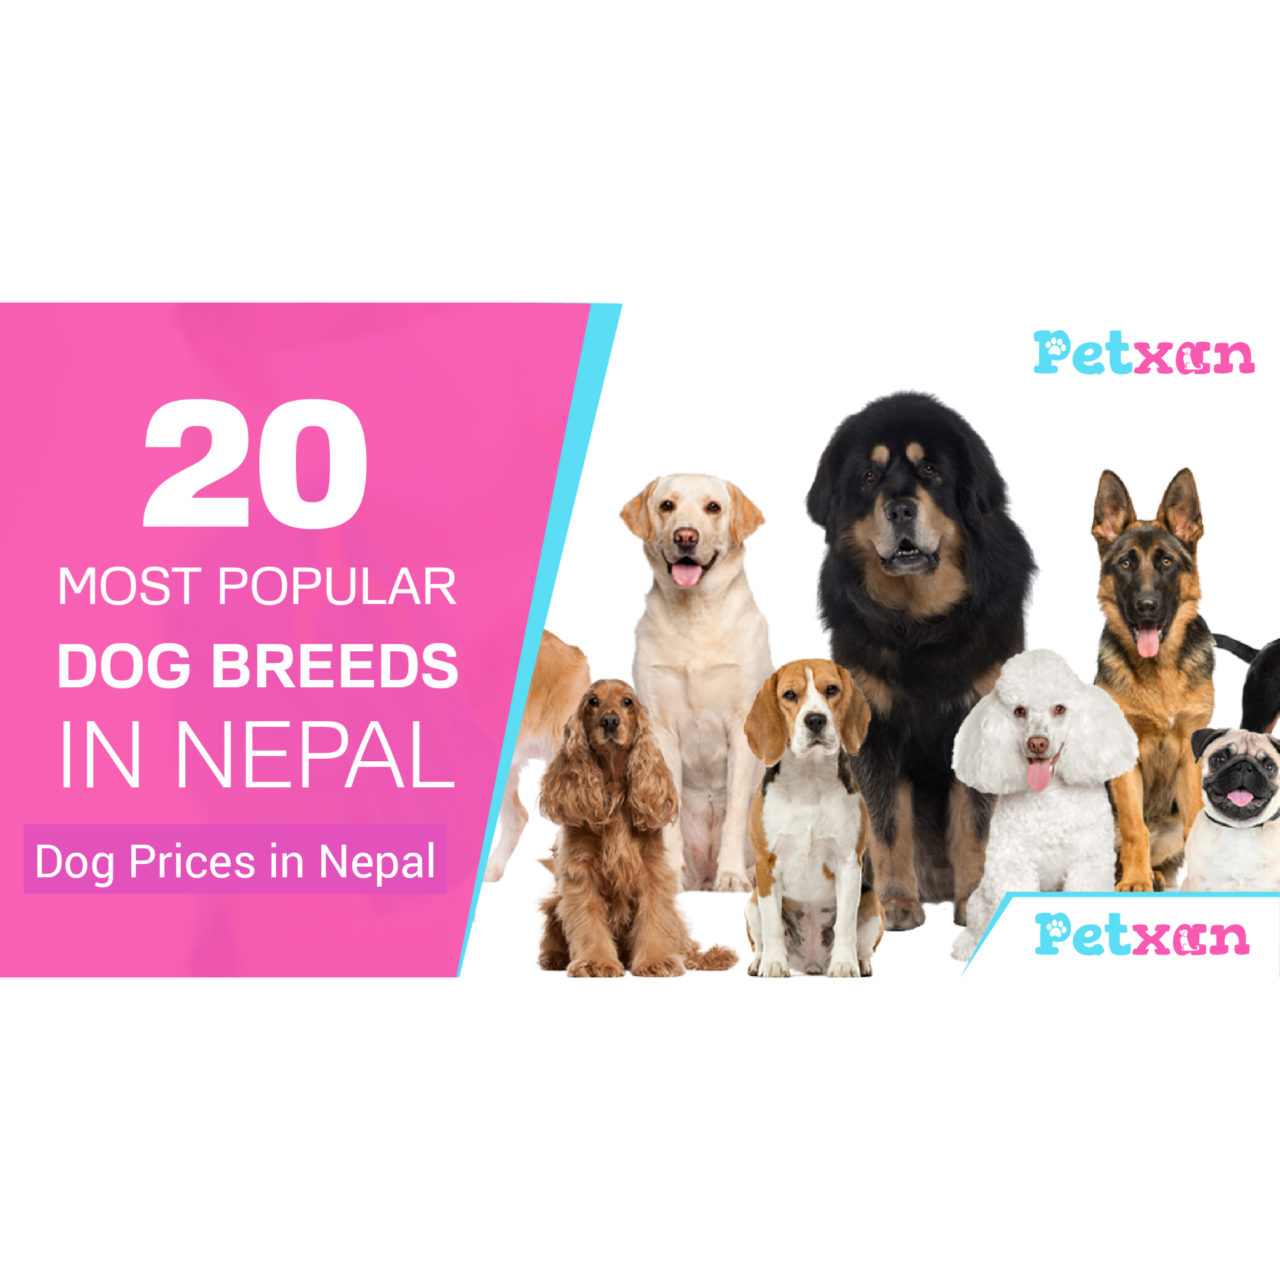 https://petxan.com/wp-content/uploads/2022/07/Prices-of-most-popular-breeds-of-dogs-in-Nepal-1280x1280.jpg